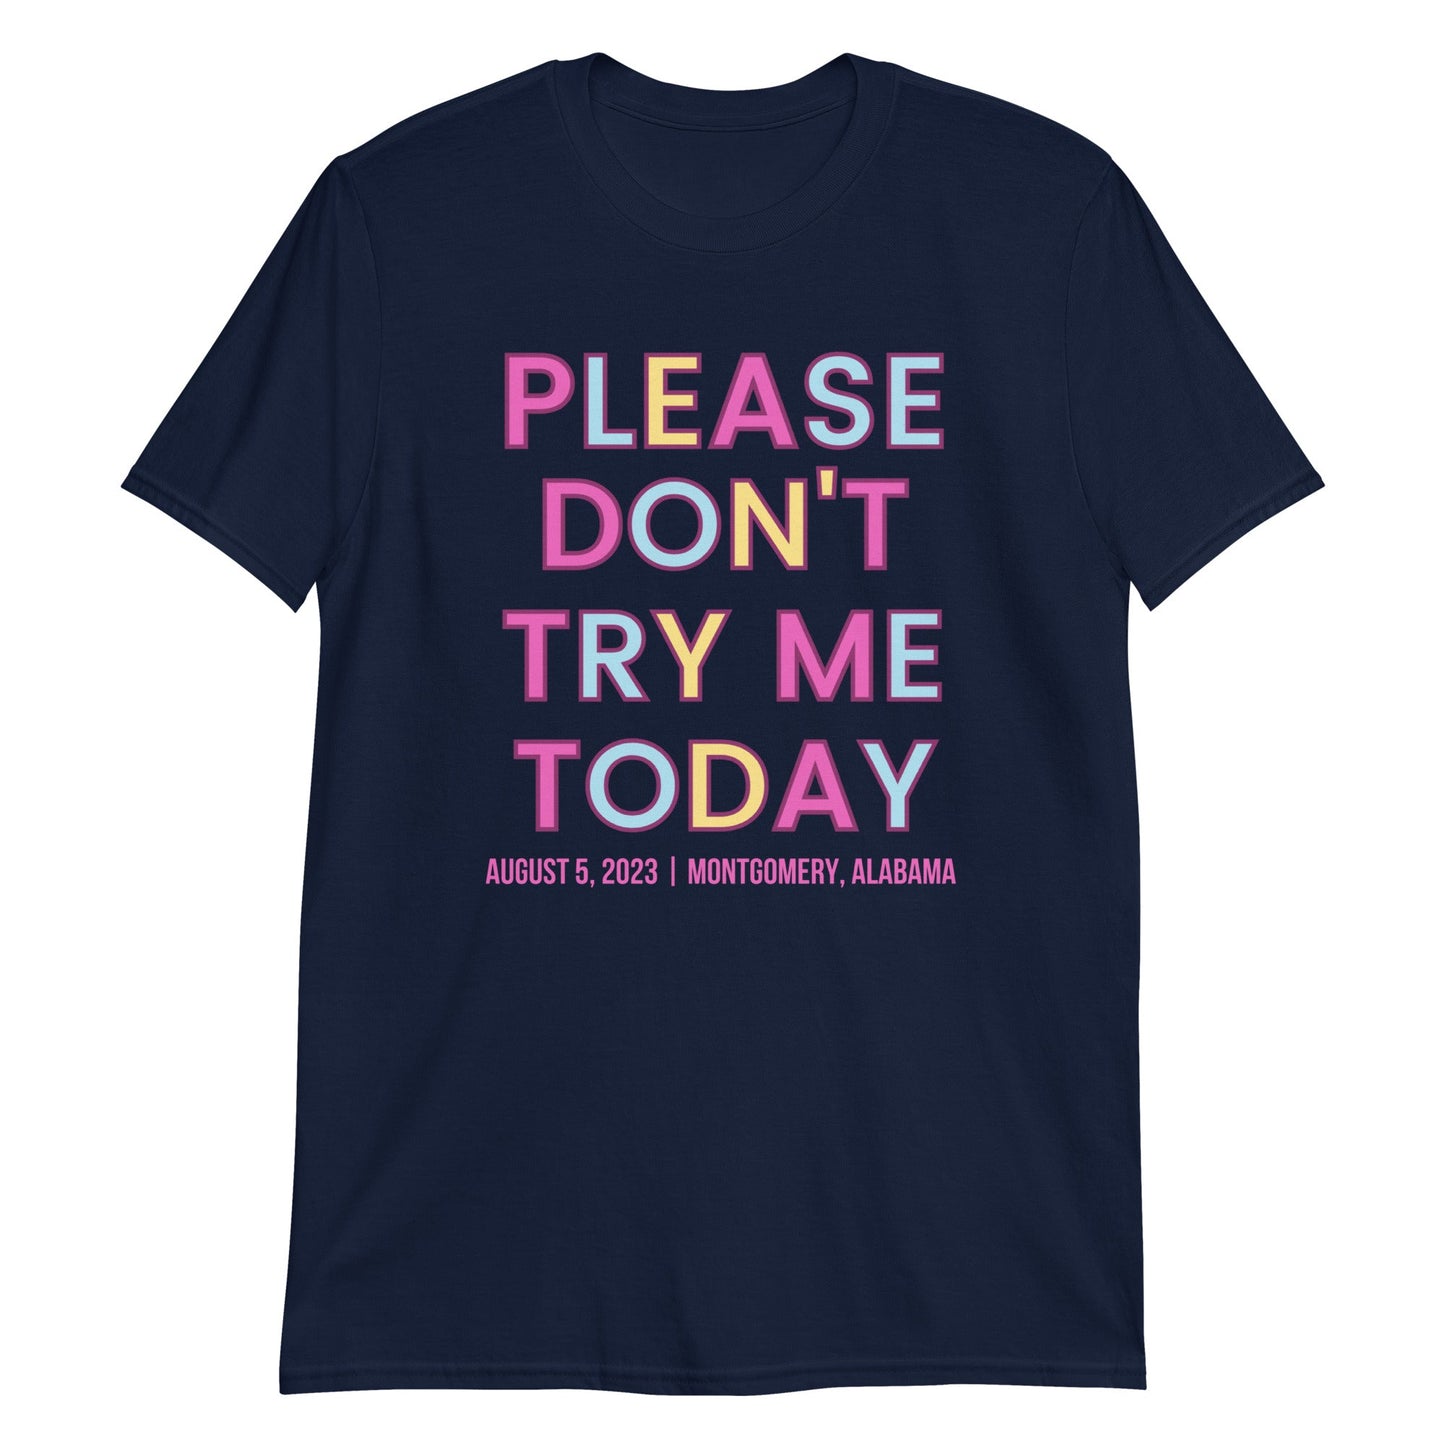 PLEASE DON'T TRY ME TODAY - ALABAMA EDITION 8/5/23 - Short-Sleeve Unisex T-Shirt | (For a Slim Fit Order a Size Down) - Catch This Tea Shirts